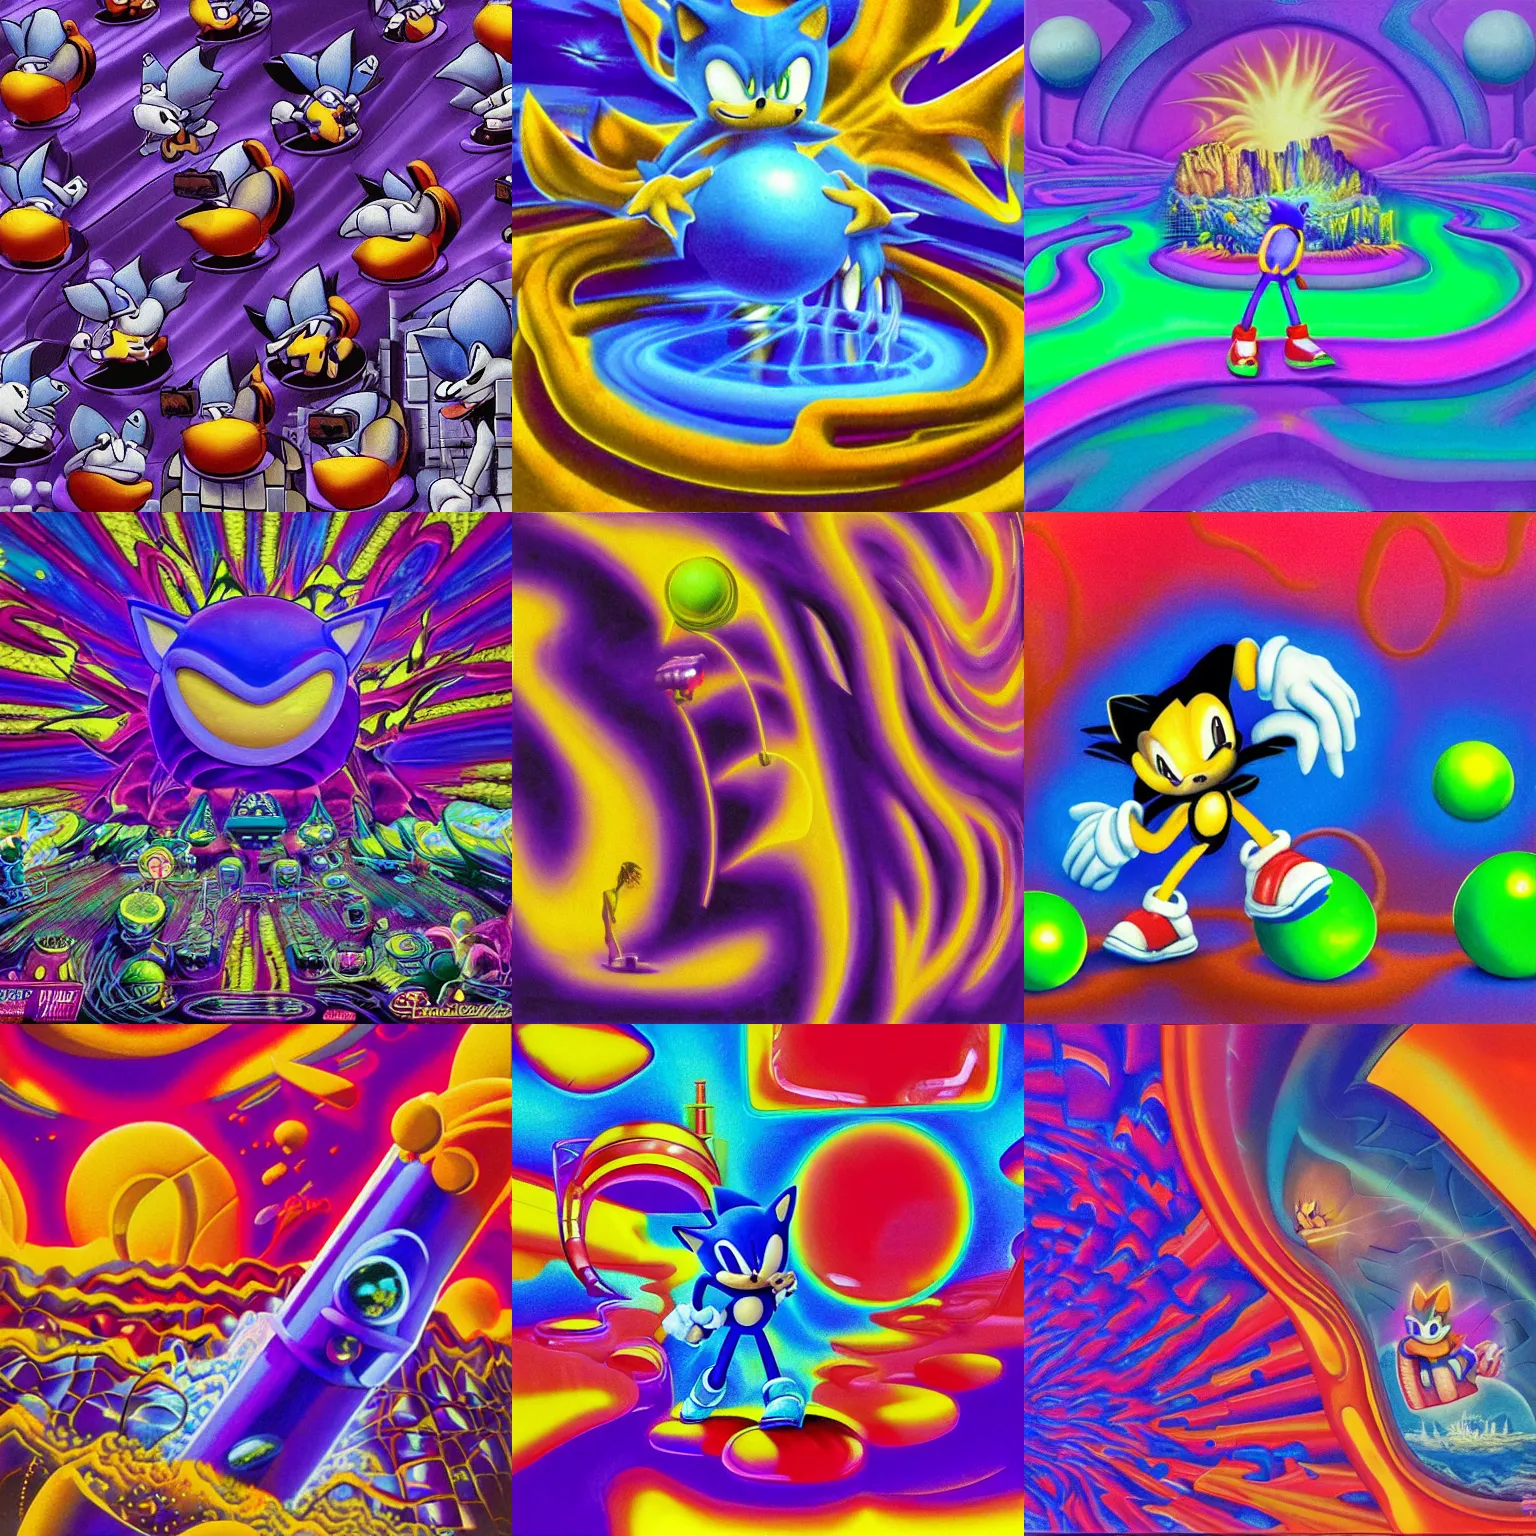 Prompt: dreaming of sonic the hedgehog closeup portrait lava lamp claymation scifi matte painting landscape of a surreal alex grey, sonic retro moulded professional soft pastels high quality airbrush art album cover of a liquid dissolving airbrush art lsd sonic the hedgehog swimming through cyberspace purple checkerboard background 1 9 8 0 s 1 9 8 2 sega genesis video game album cover